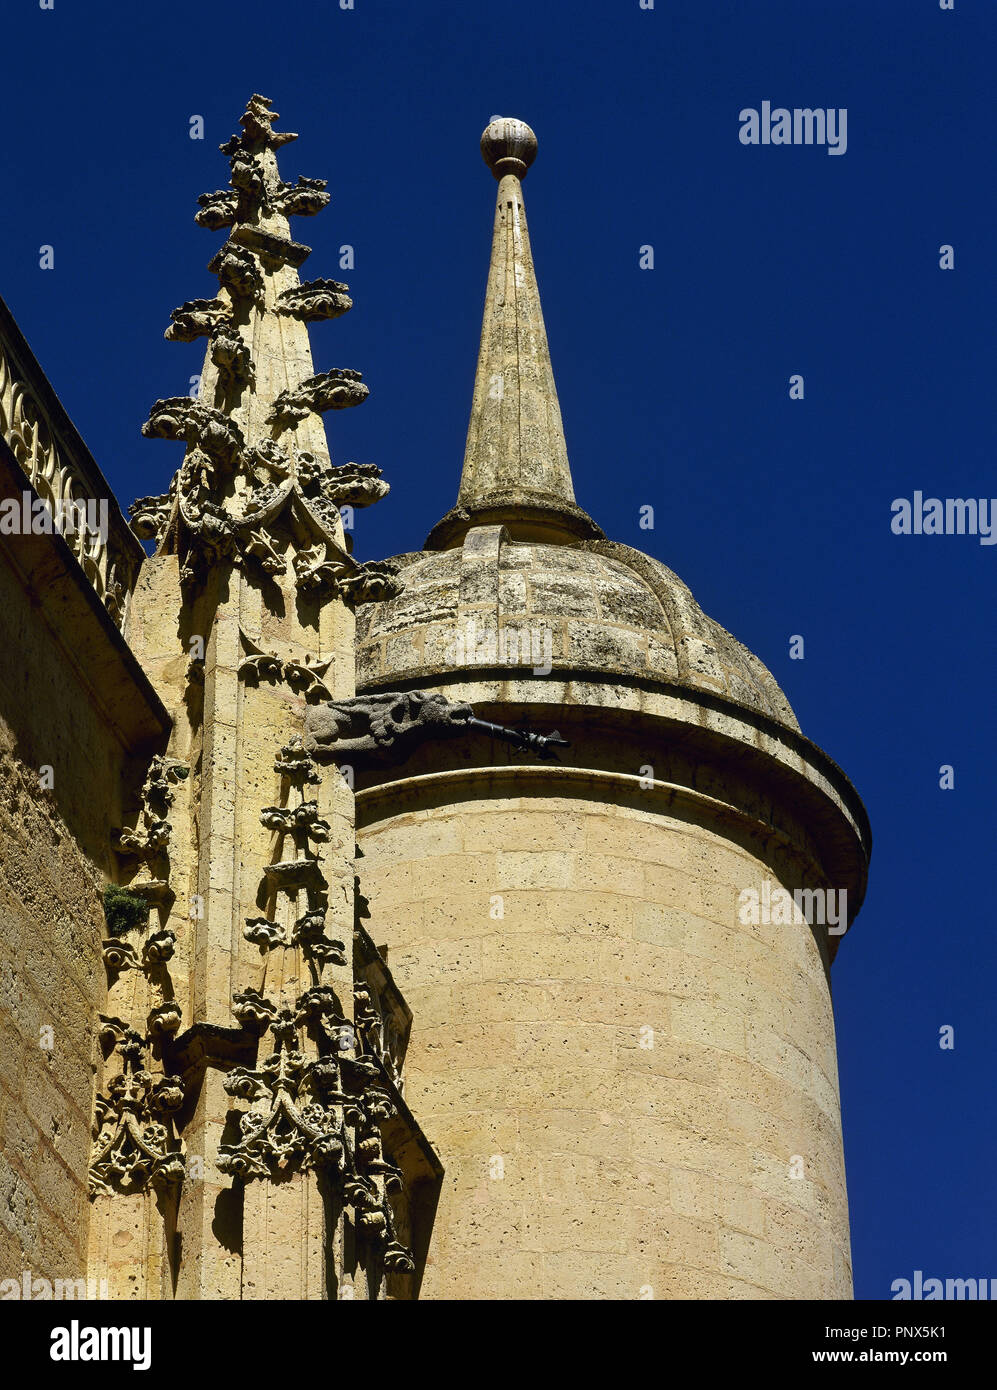 Gothic Art. Spain. Segovia. Cathedral. Built between 1525 and 1577 by Juan Gil de Hontanon (1480-1526) and finished by his son Rodrigo (1500Ð1577)  at his death. Exterior view. Detail. Pinnacle. Stock Photo